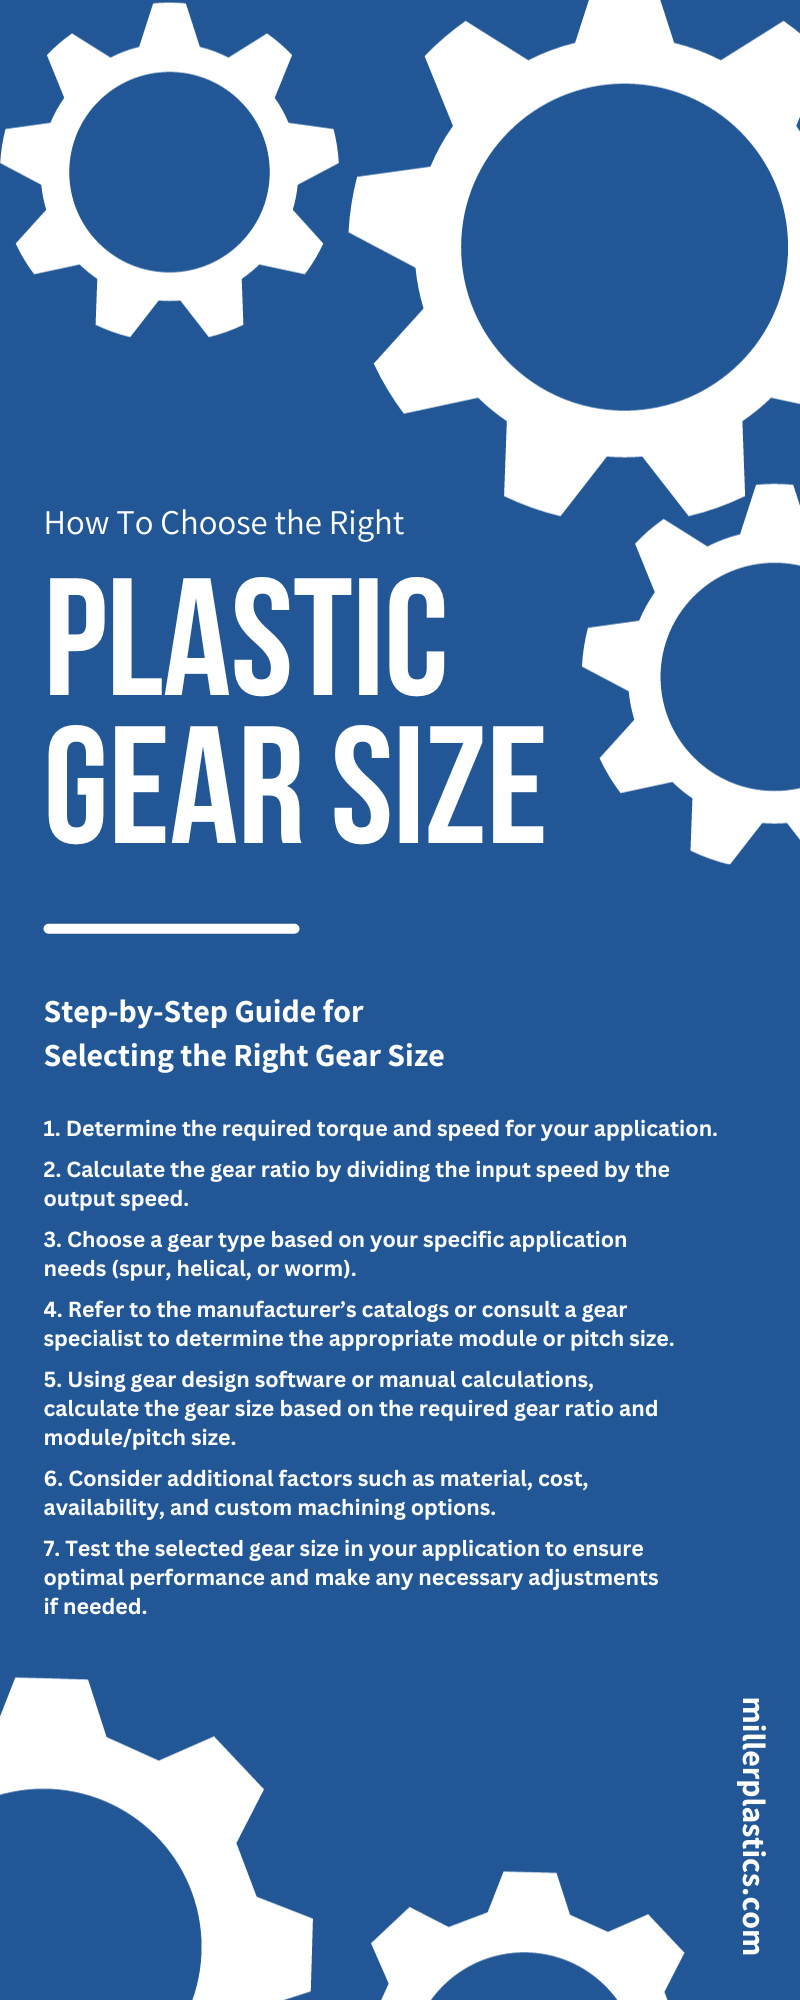 How To Choose the Right Plastic Gear Size